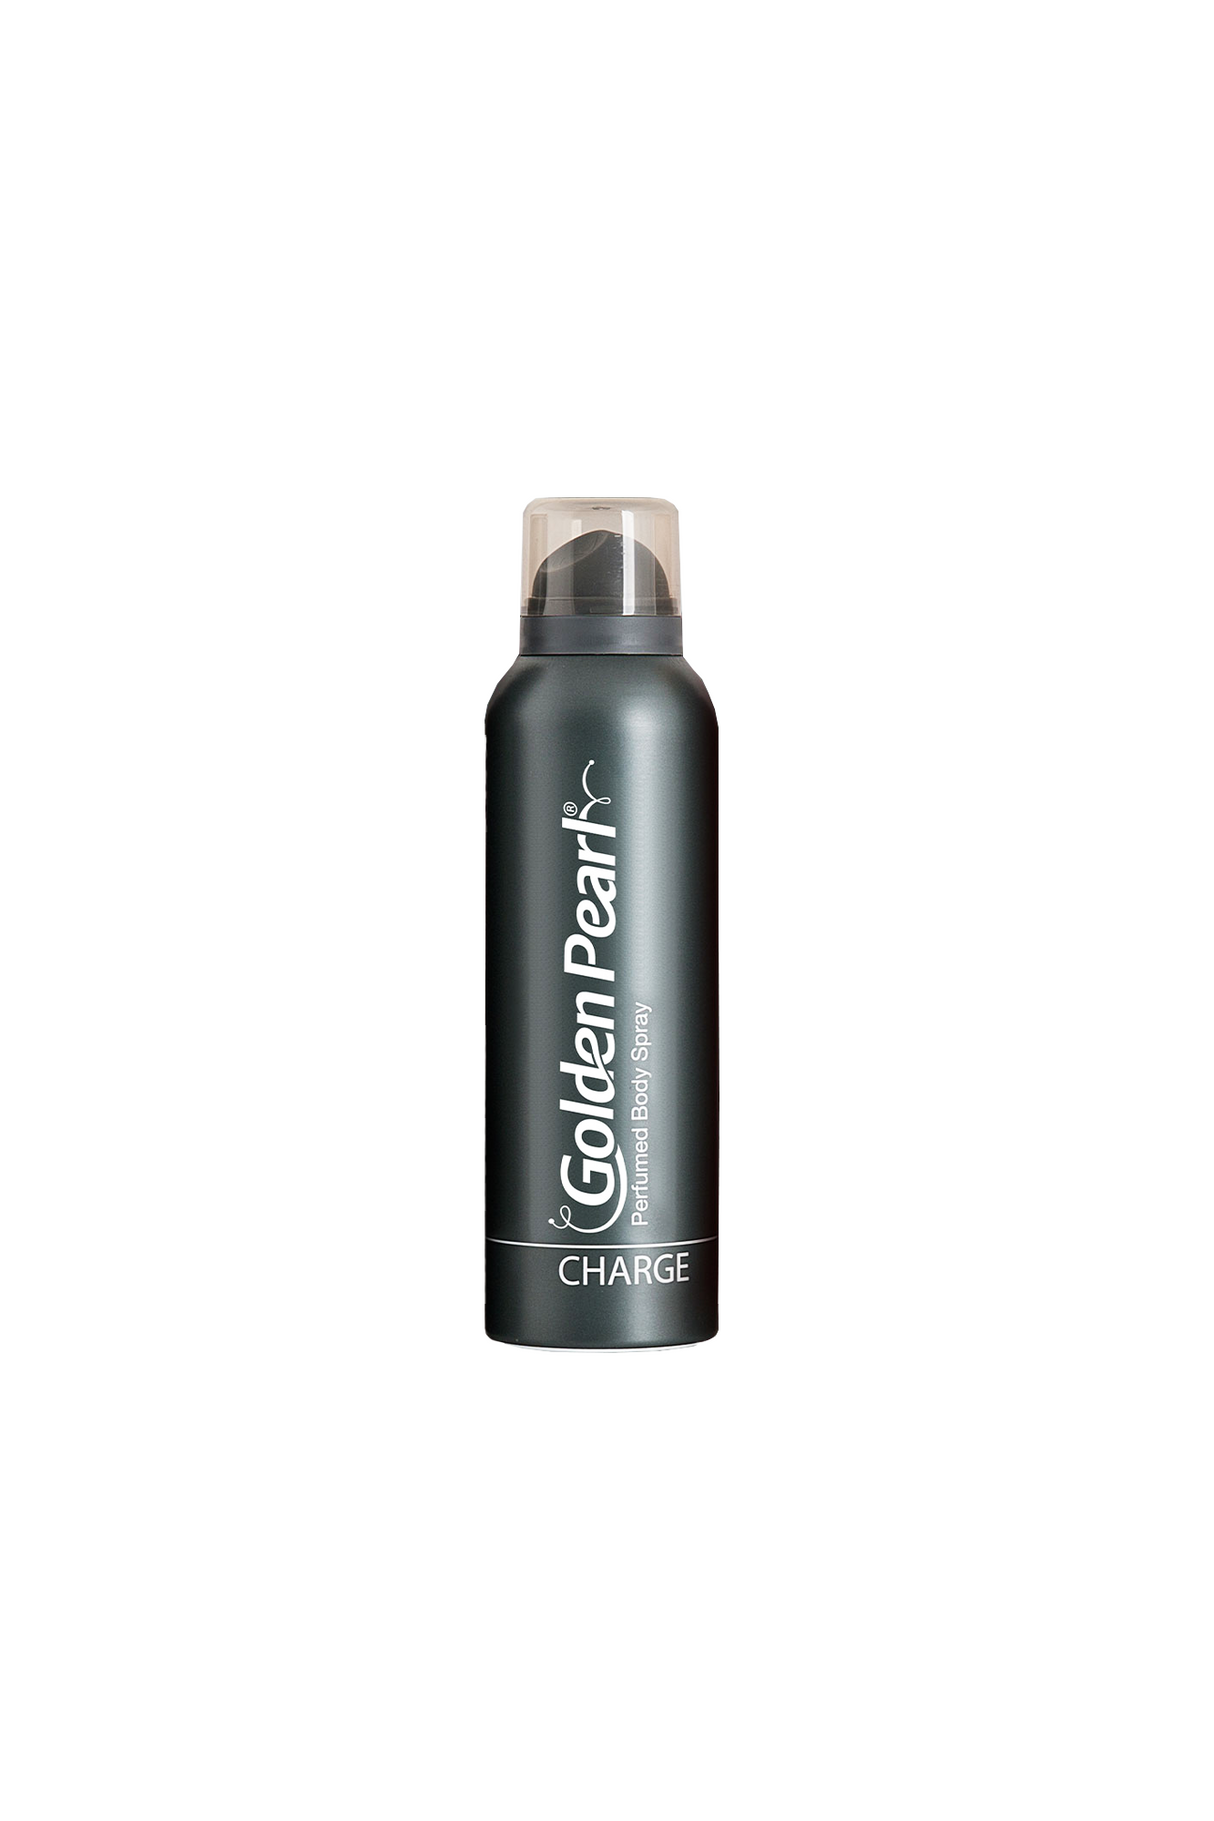 golden pearl body spray charge 200ml